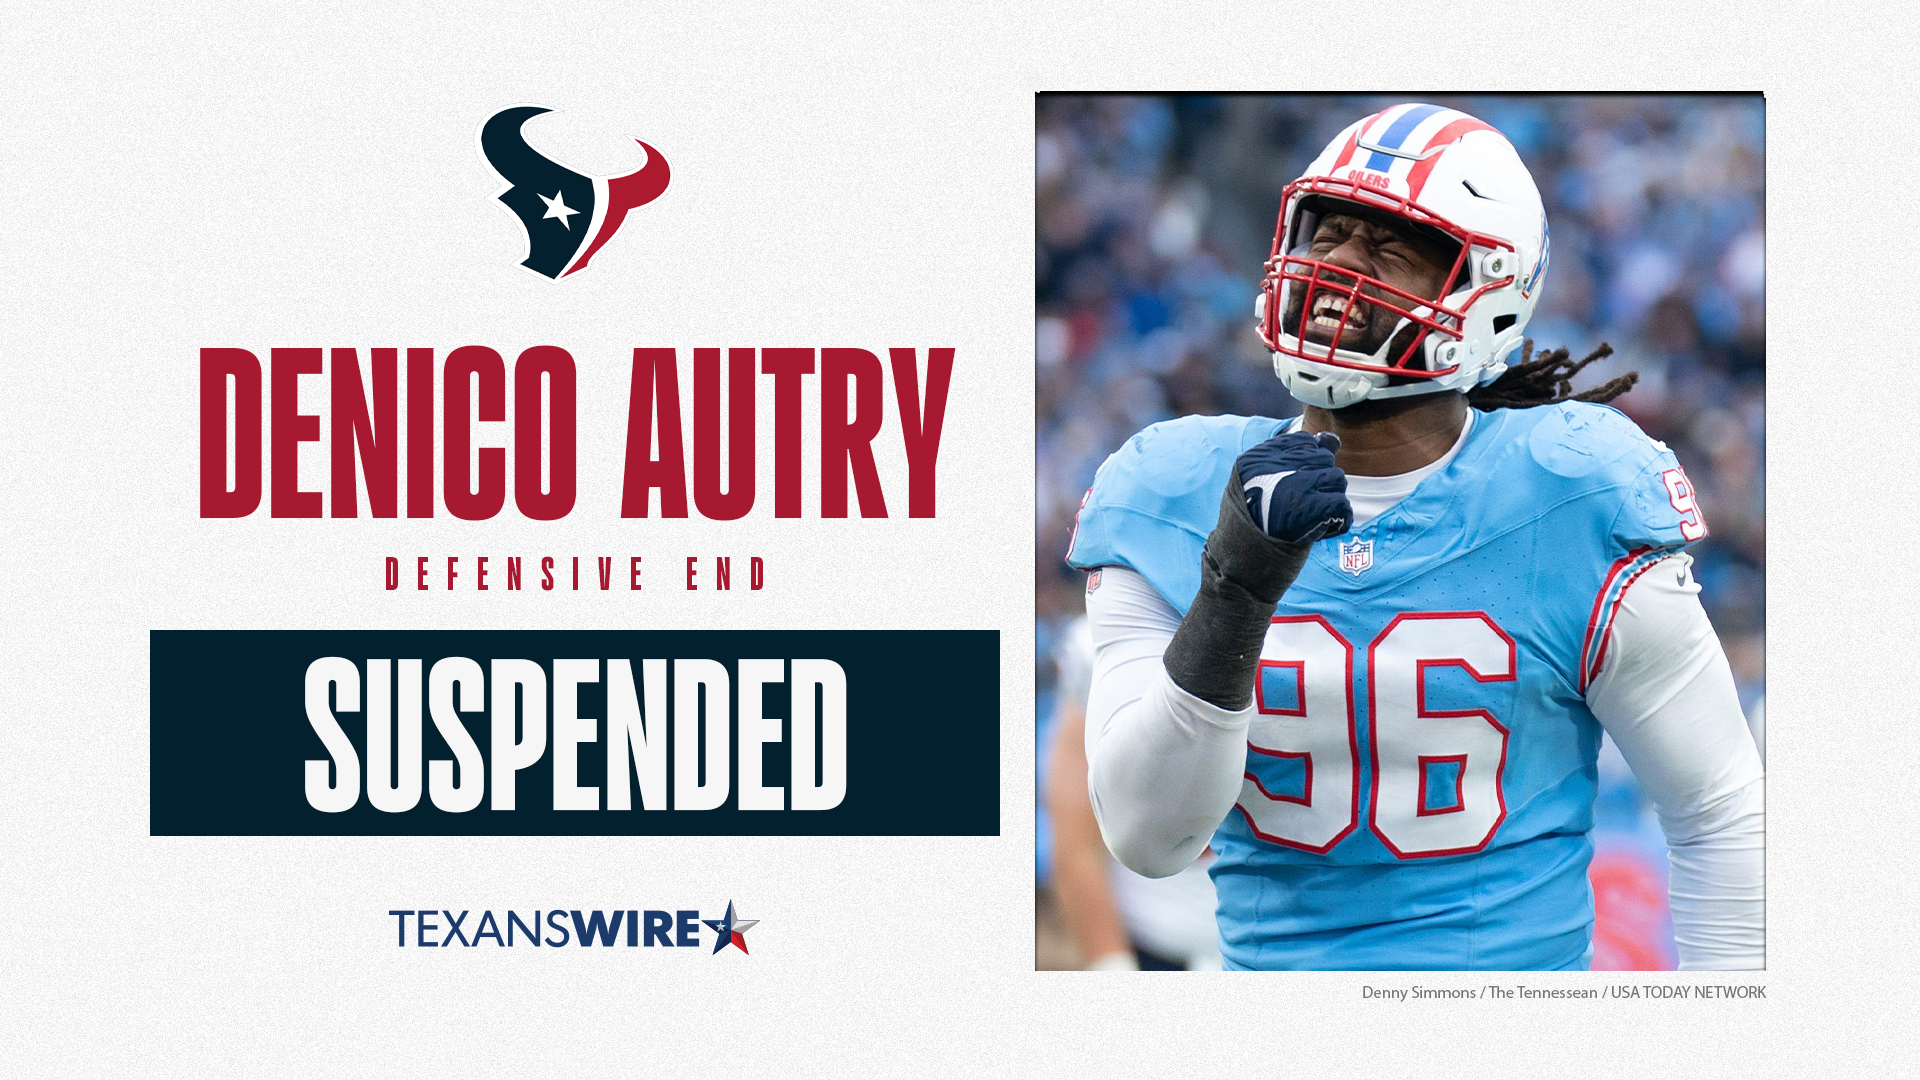 Where do Texans turn following suspension of Denico Autry?